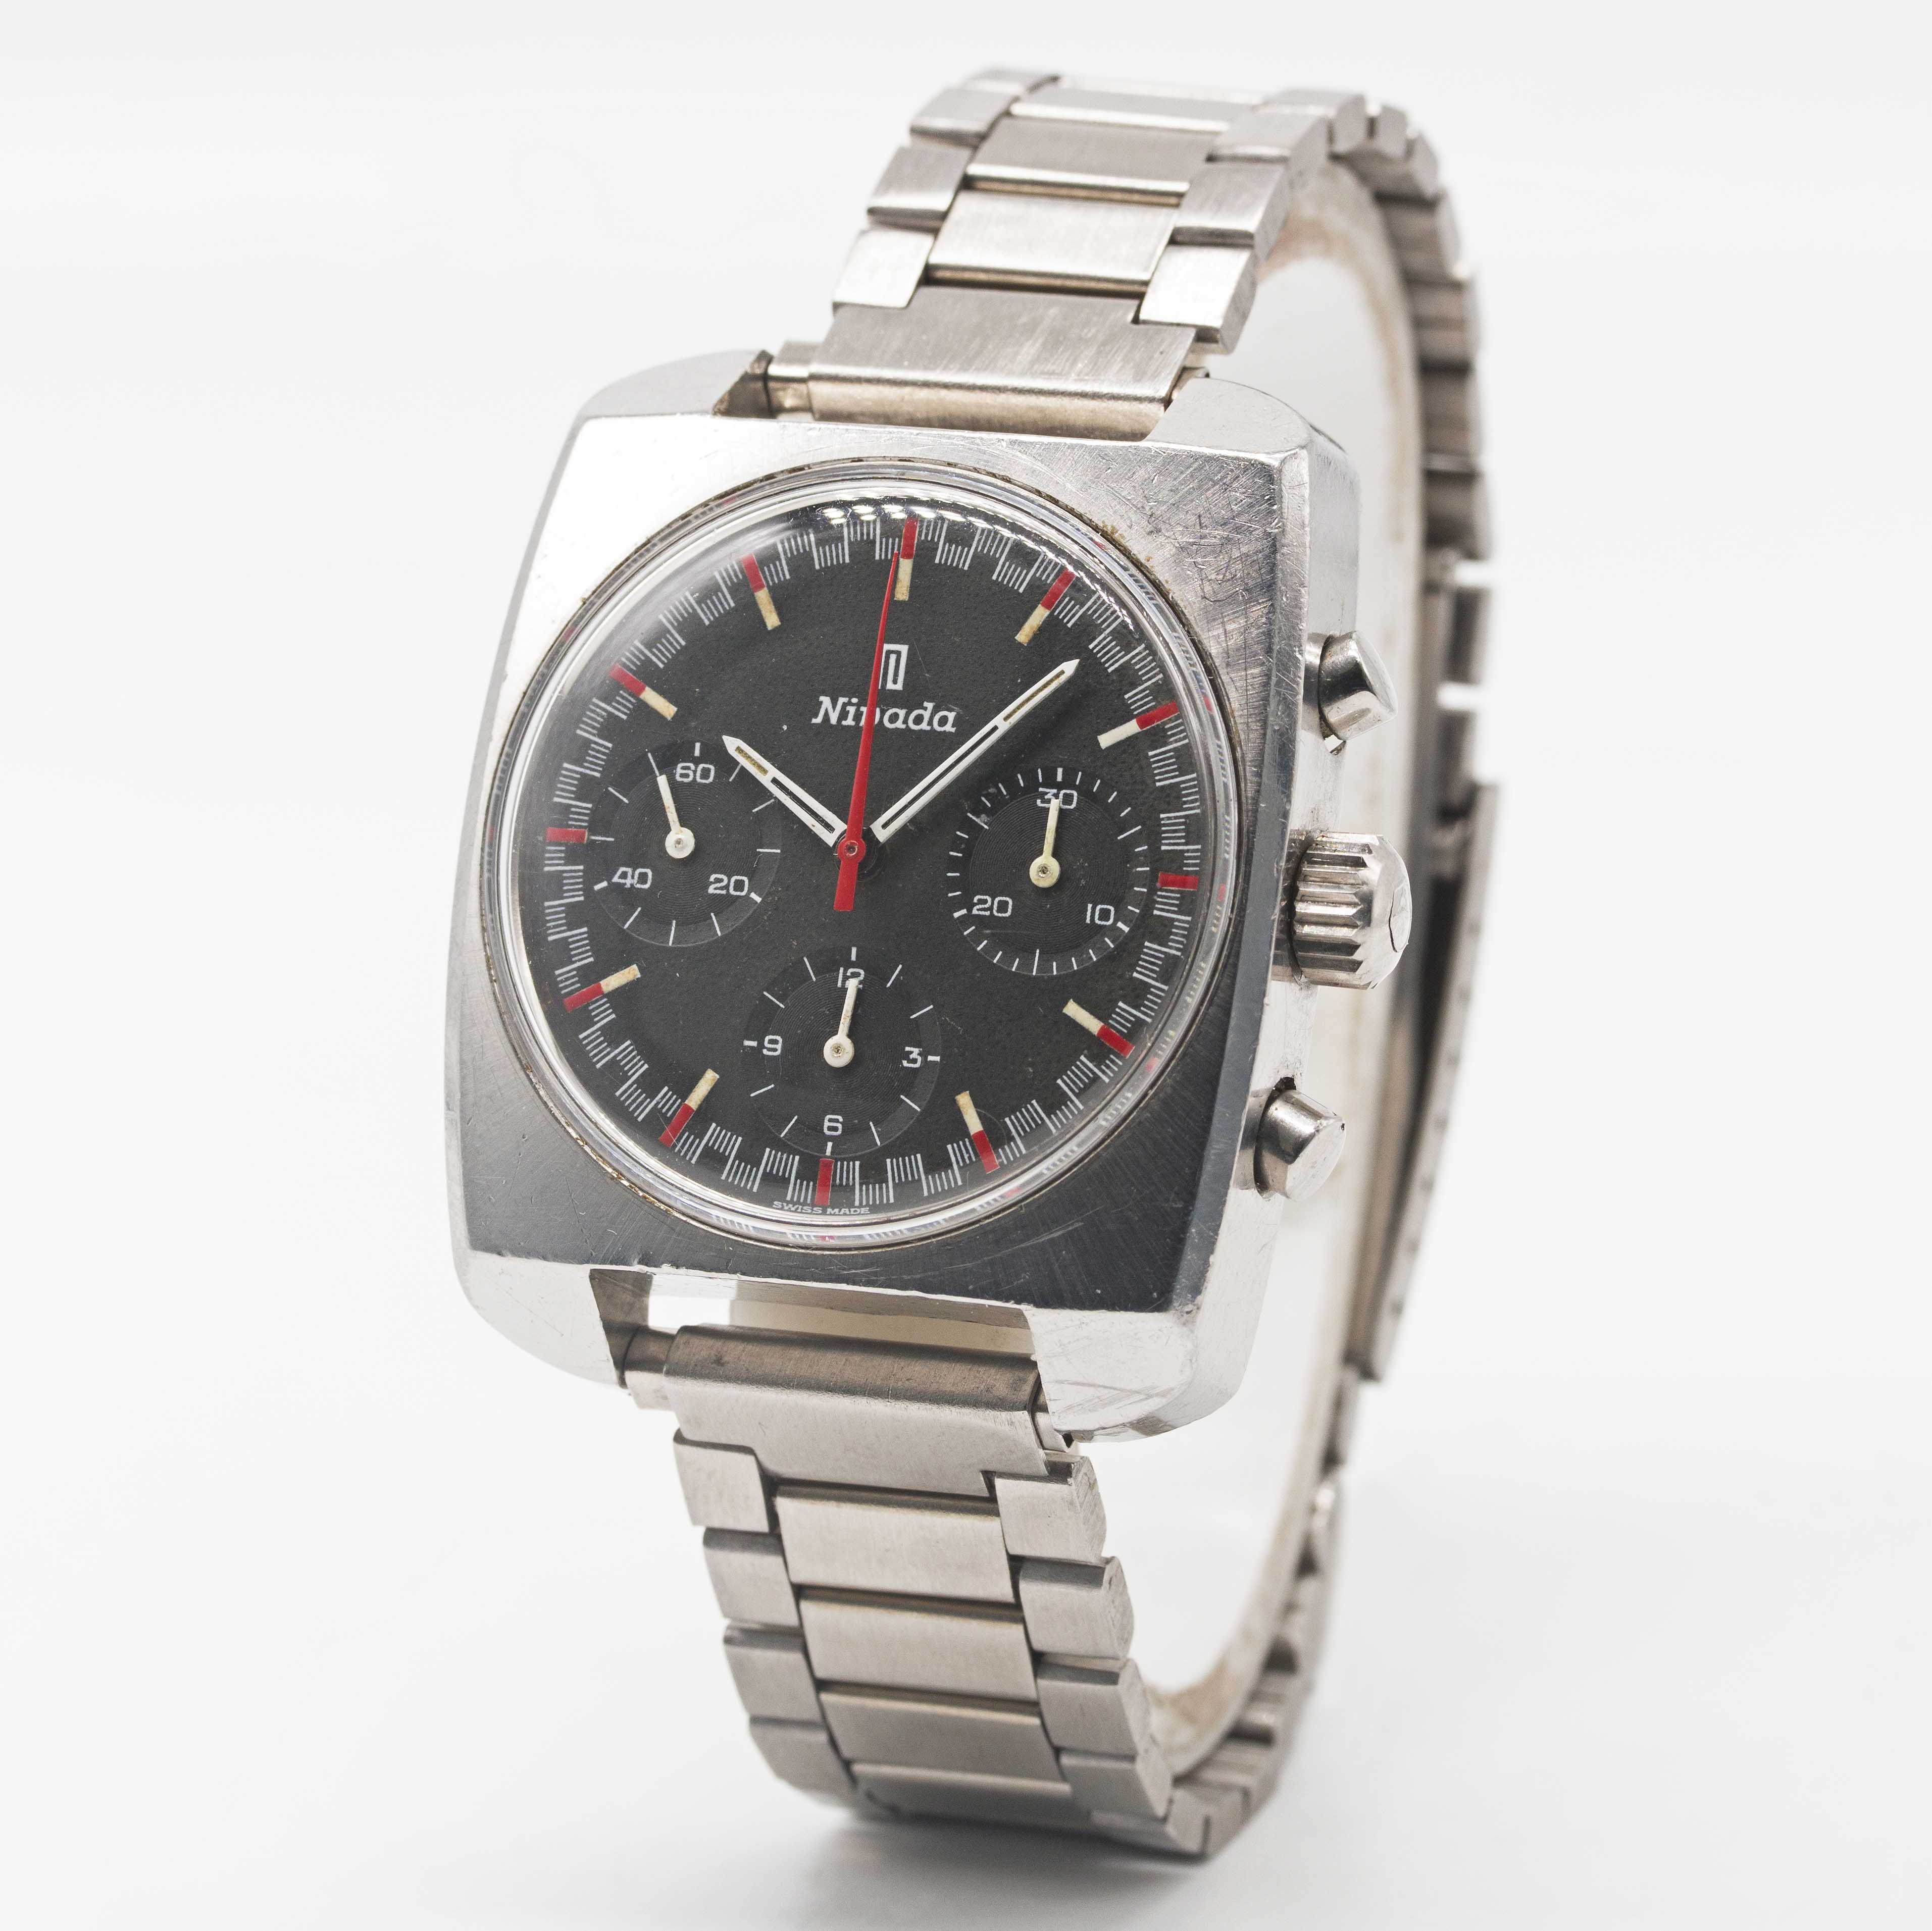 A GENTLEMAN'S STAINLESS STEEL NIVADA CHRONOGRAPH BRACELET WATCH CIRCA 1970, REF. 85014 WITH - Image 3 of 7